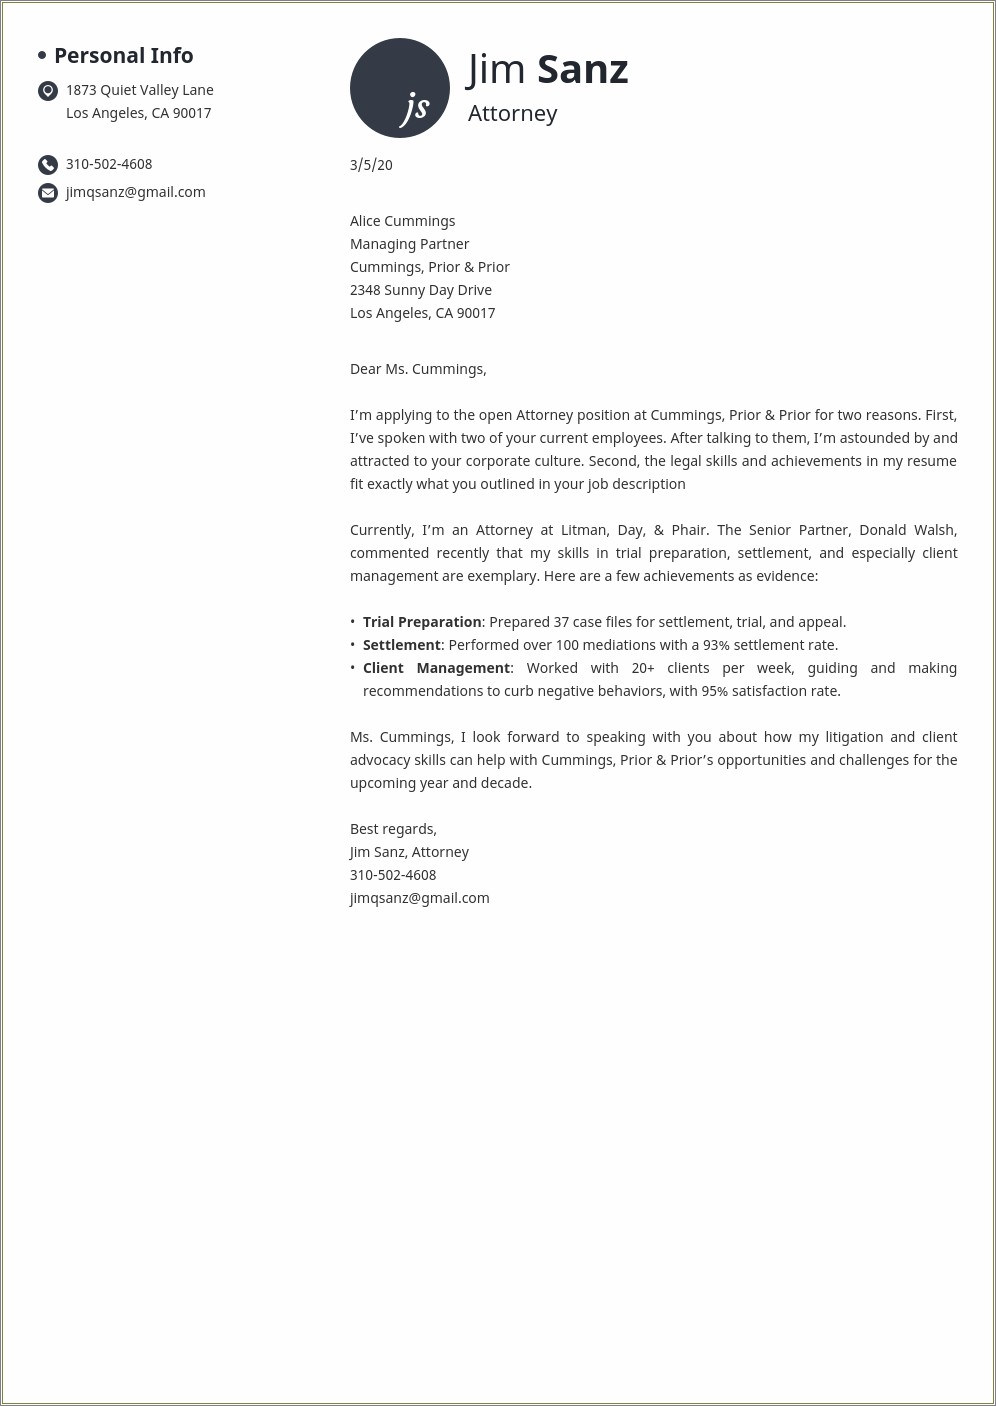 Resume Cover Letter Corporate Counsel Position